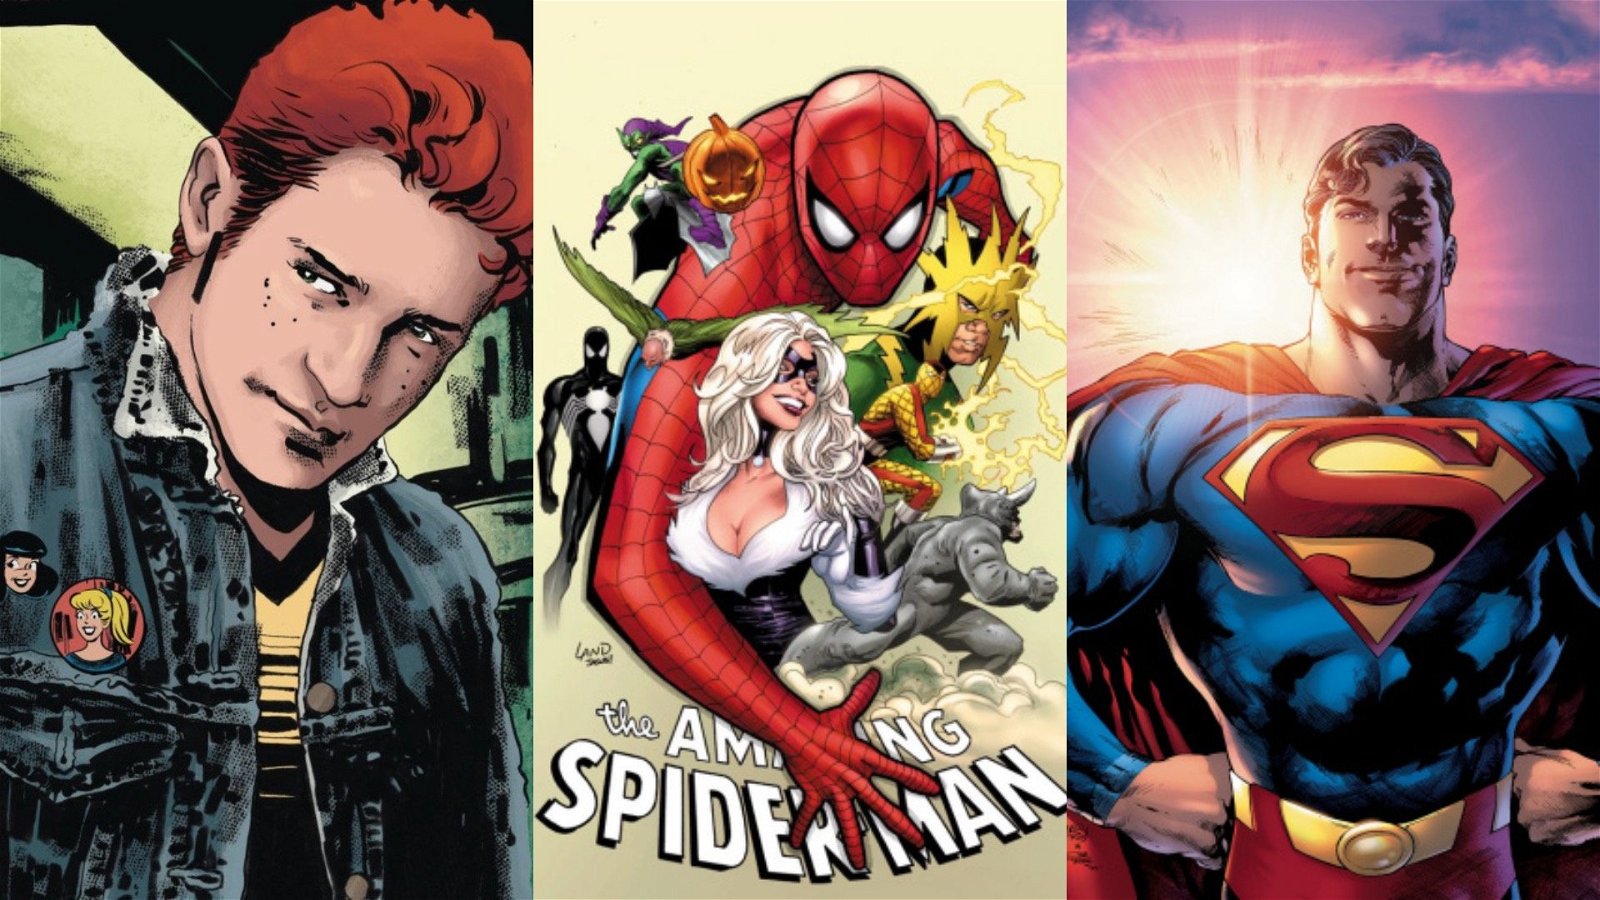 Best Comics to Buy This Week (July 10th): Spiderman and Superman Kick off New Series